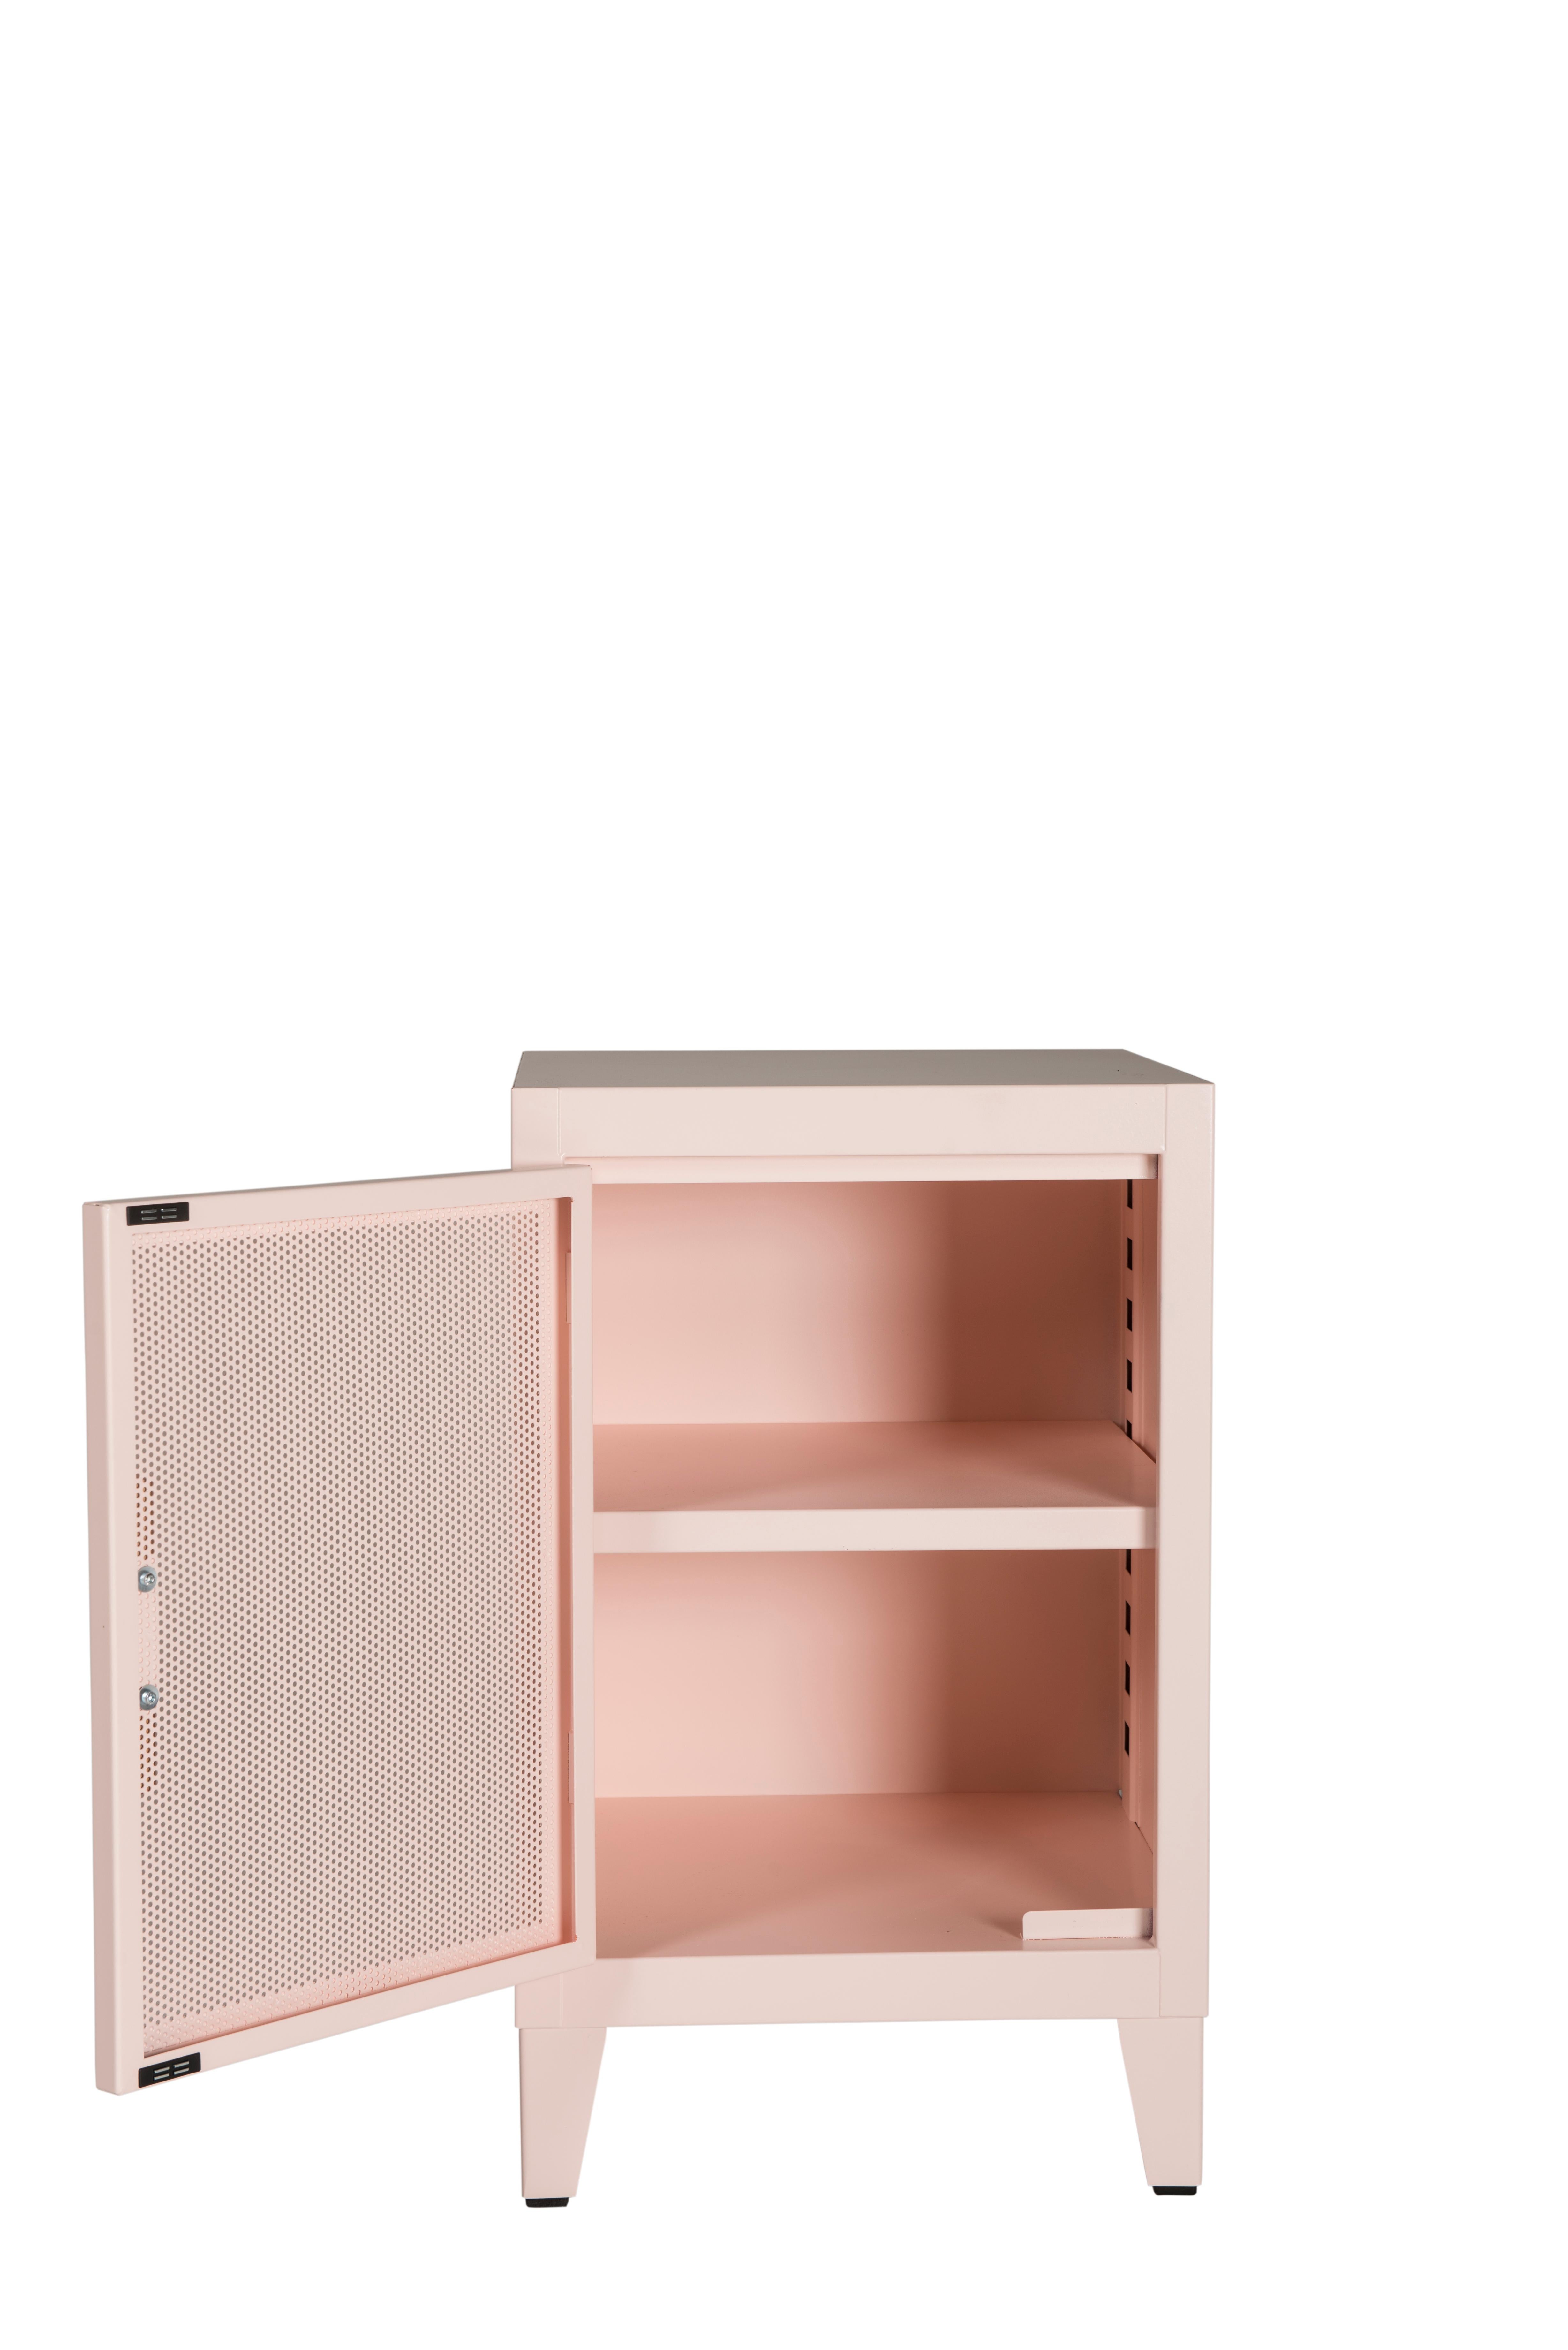 For Sale: Pink (Rose Poudré) B1 H64 Perforated Mini Steel Locker in Pop Colors by Tolix 3